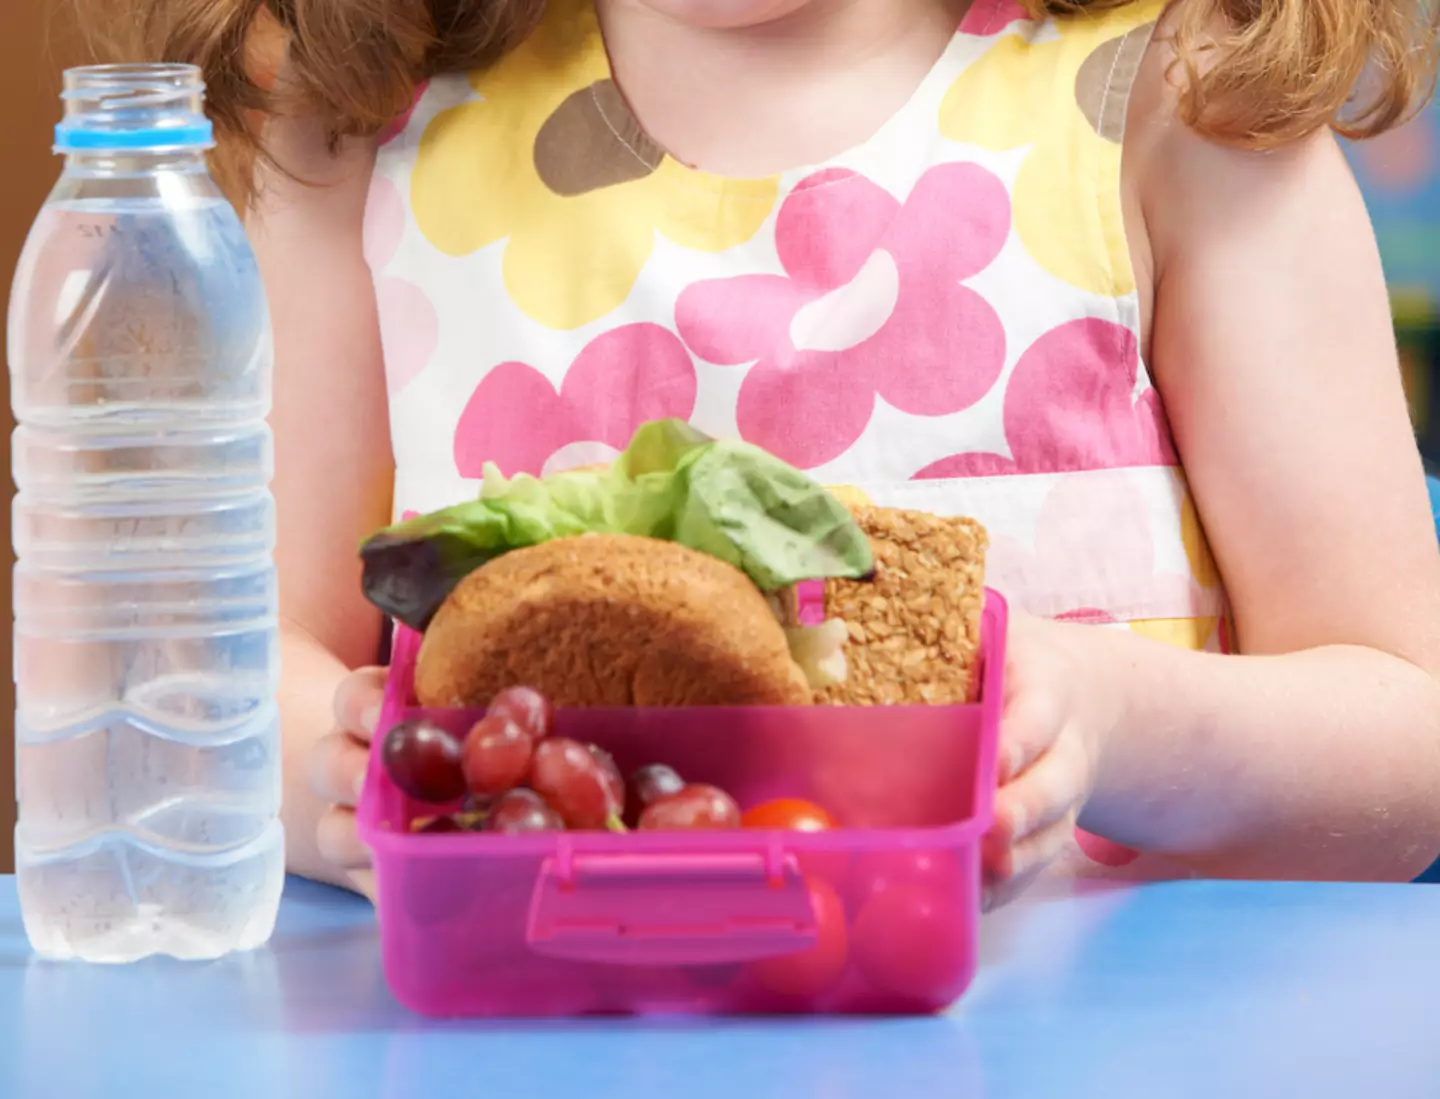 Some parents said they had similar lunches when they were children (